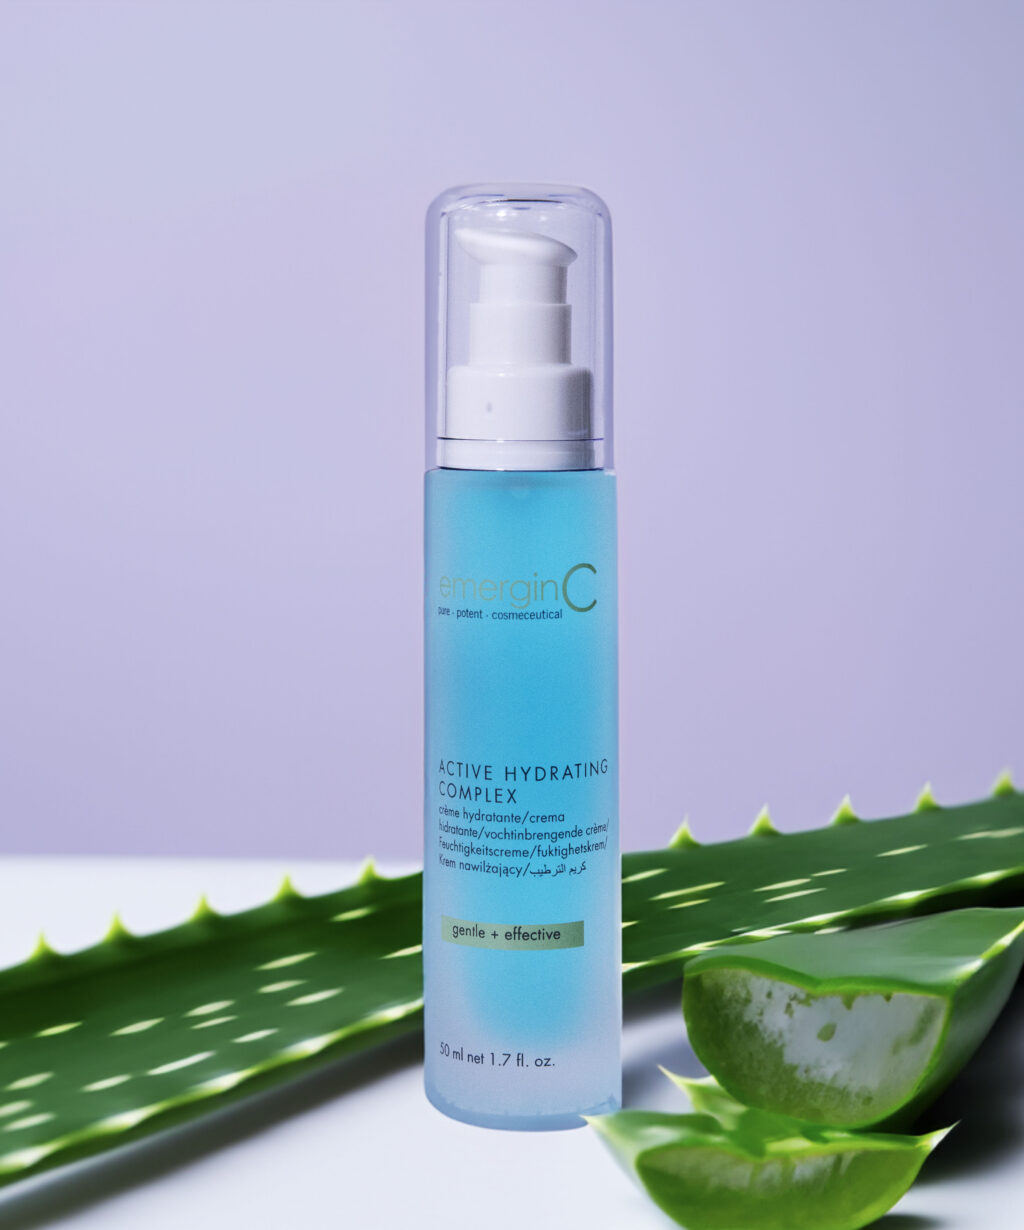 A sleek bottle of emerginc active hydrating complex skincare product positioned in front of fresh aloe vera leaves on a soft purple background, symbolizing gentle and effective hydration care.